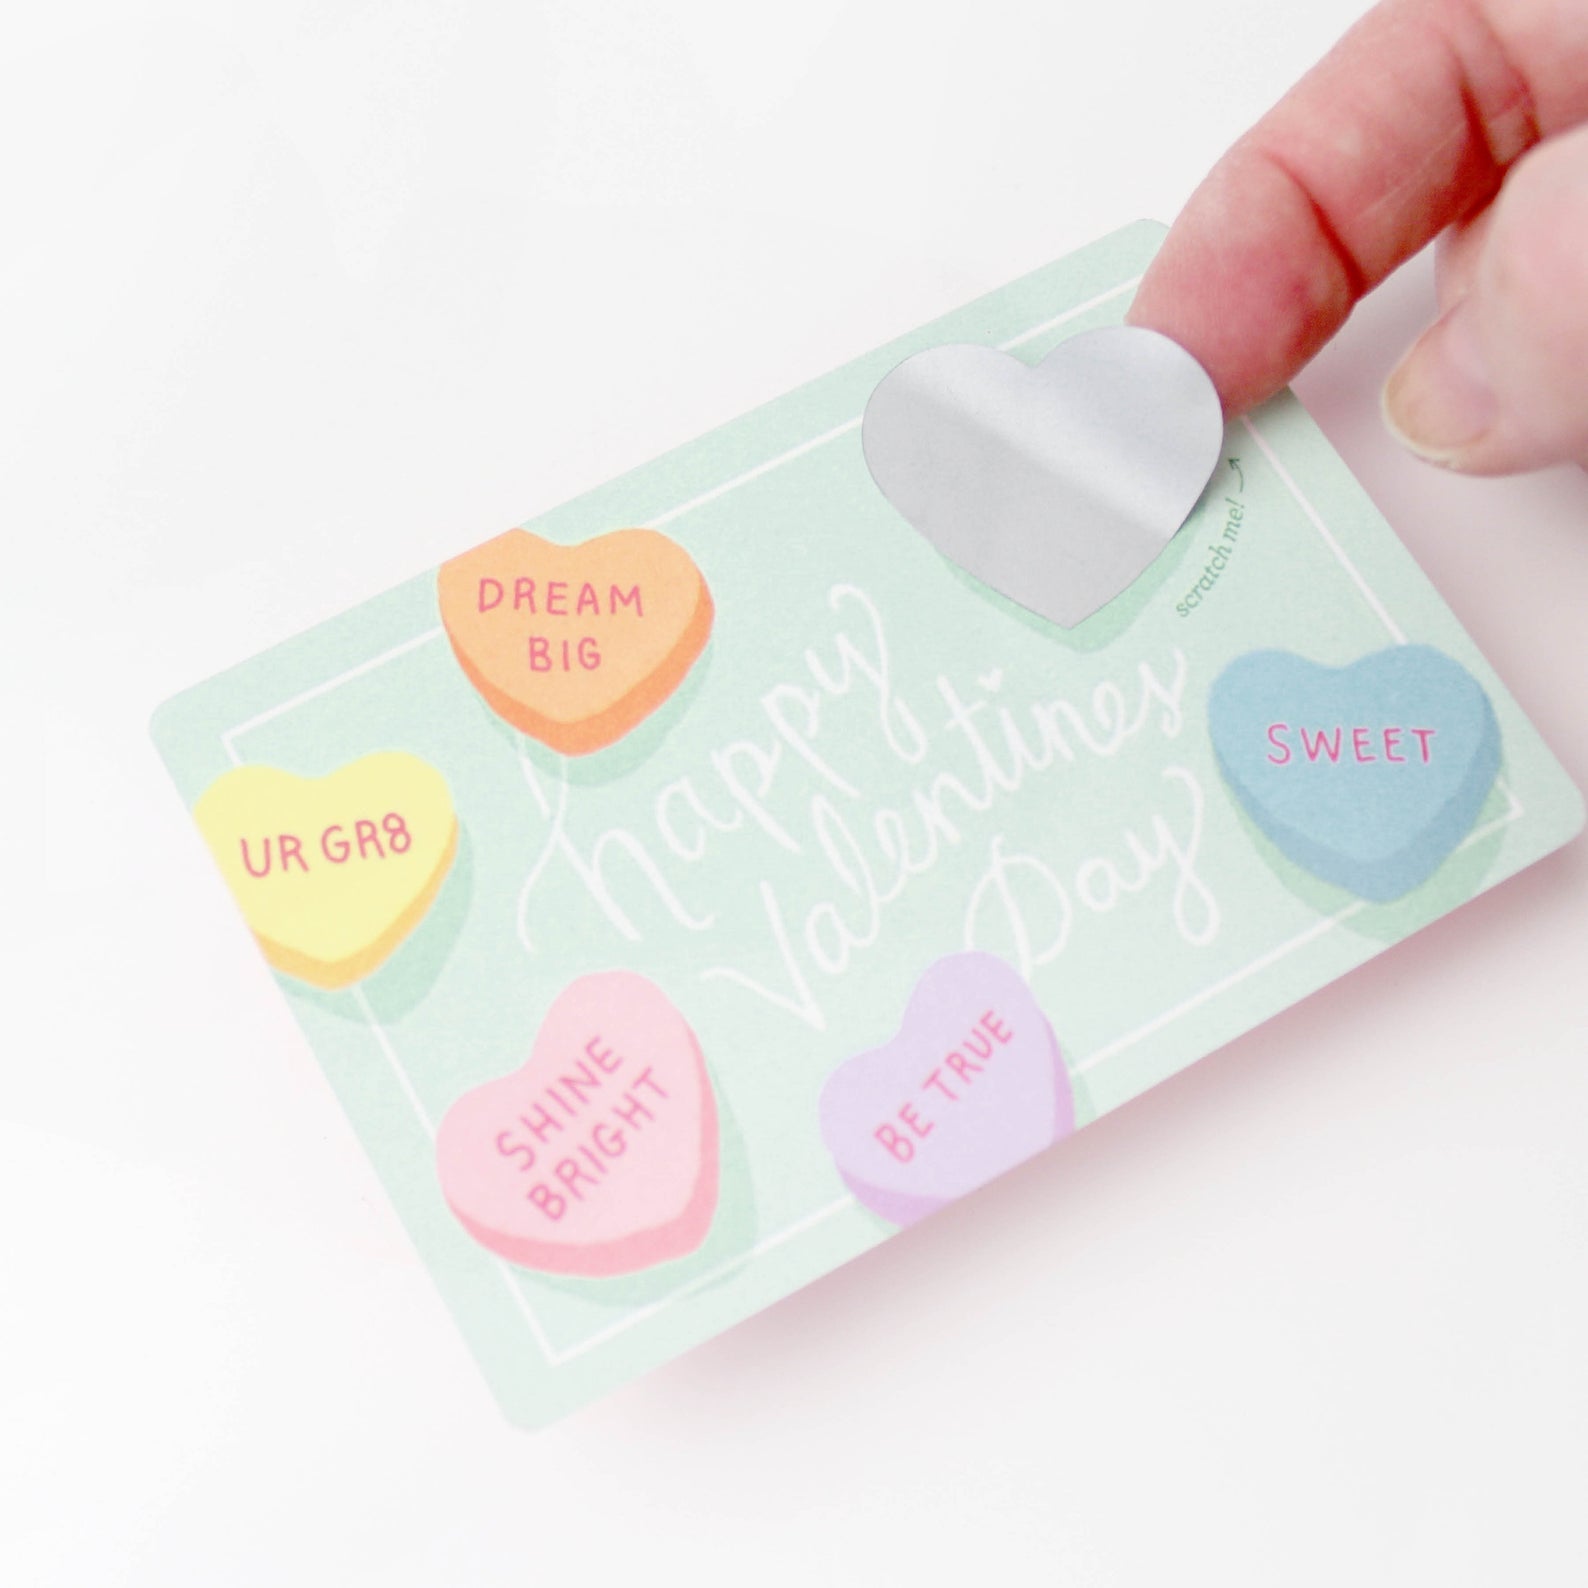 scratch off valentine's cards by inklings paperie